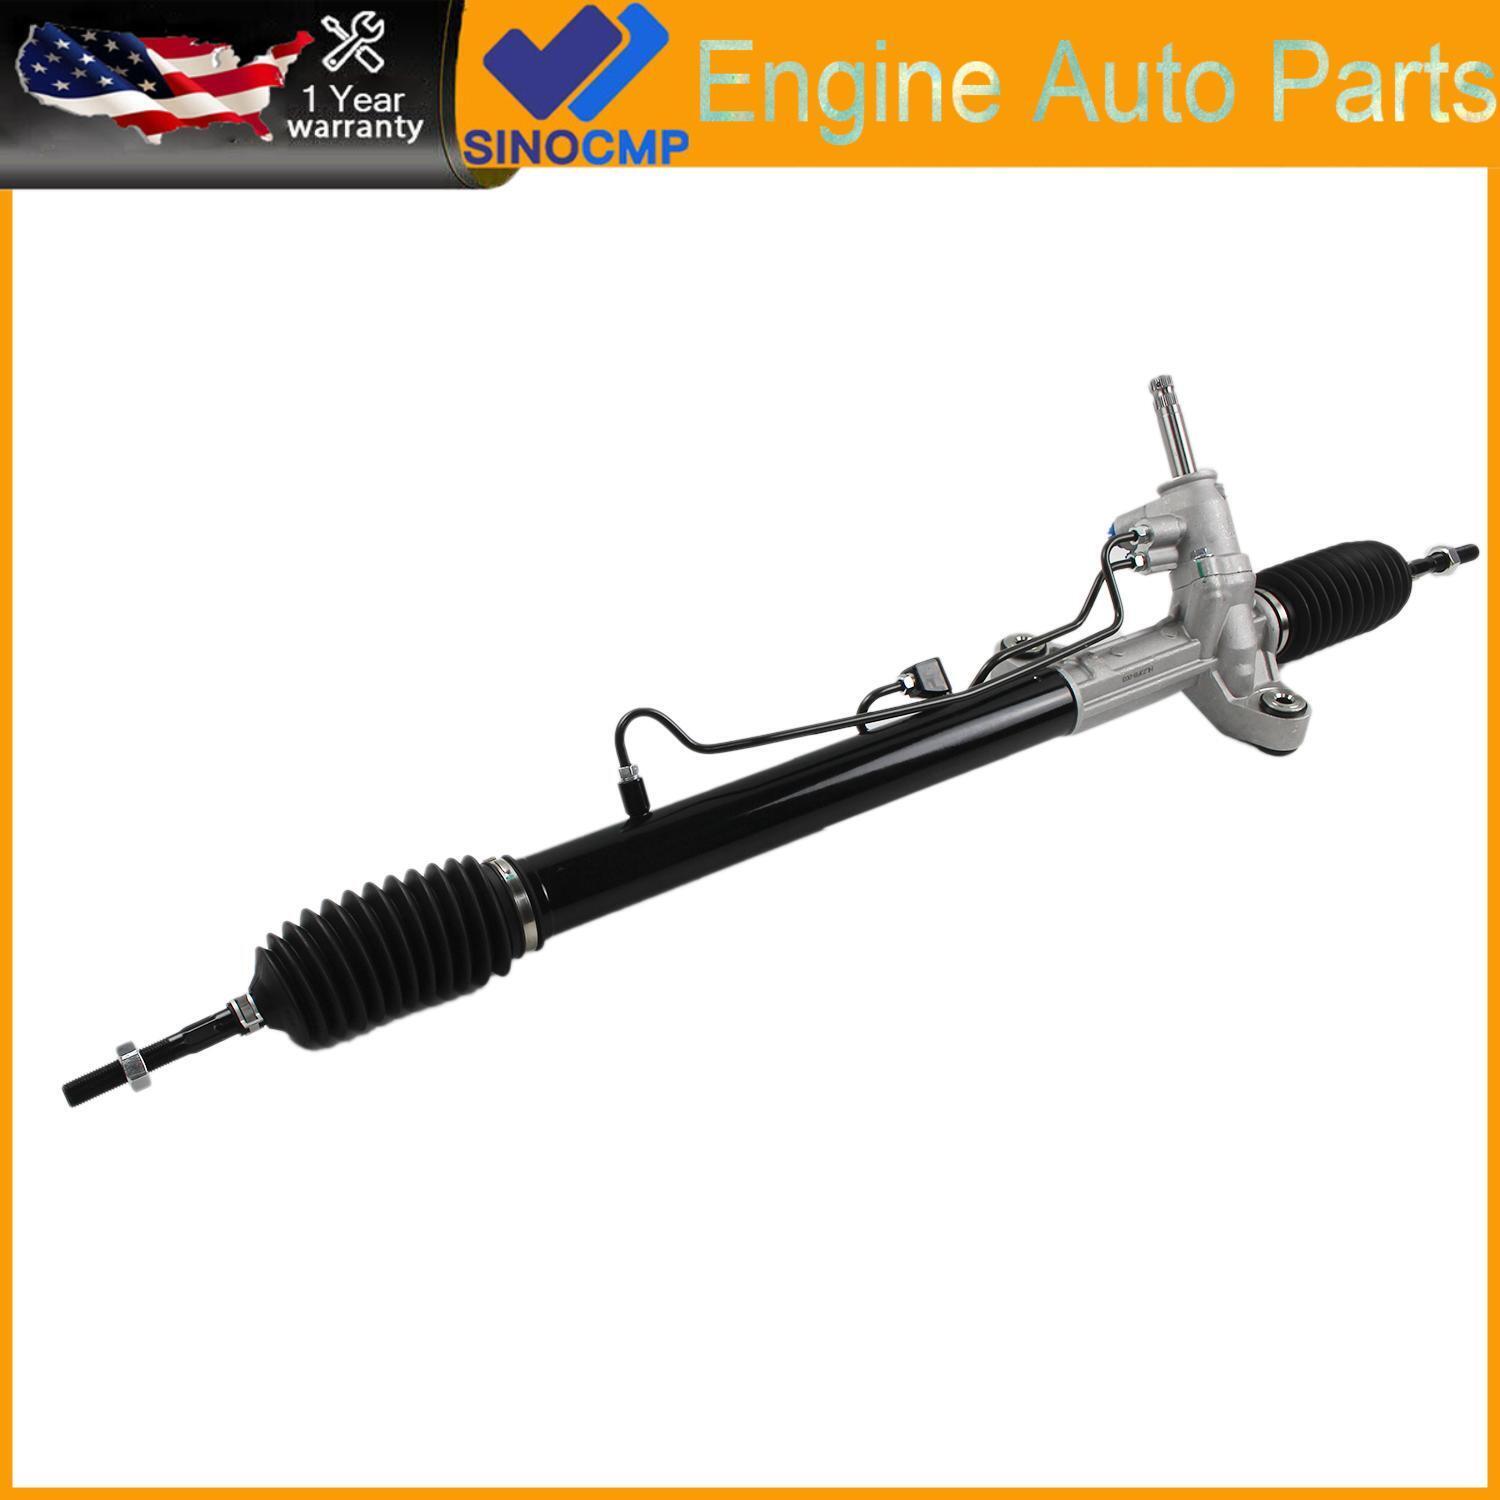 New Power Steering Rack and Pinion Assembly For 1996-2000 HONDA CIVIC 26-1769